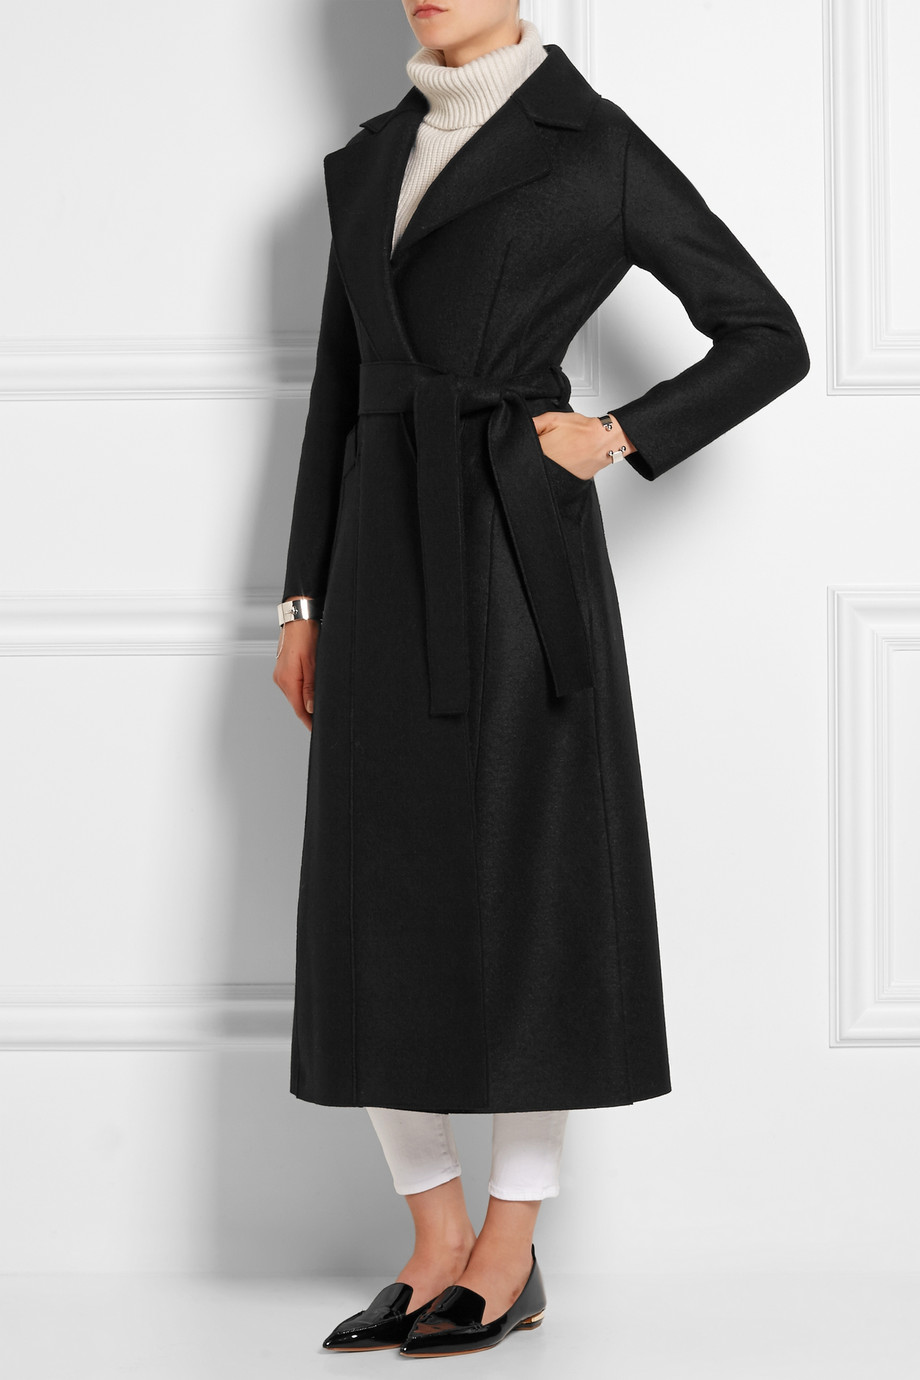 Compare Prices on Black Wool Maxi Coats- Online Shopping/Buy Low